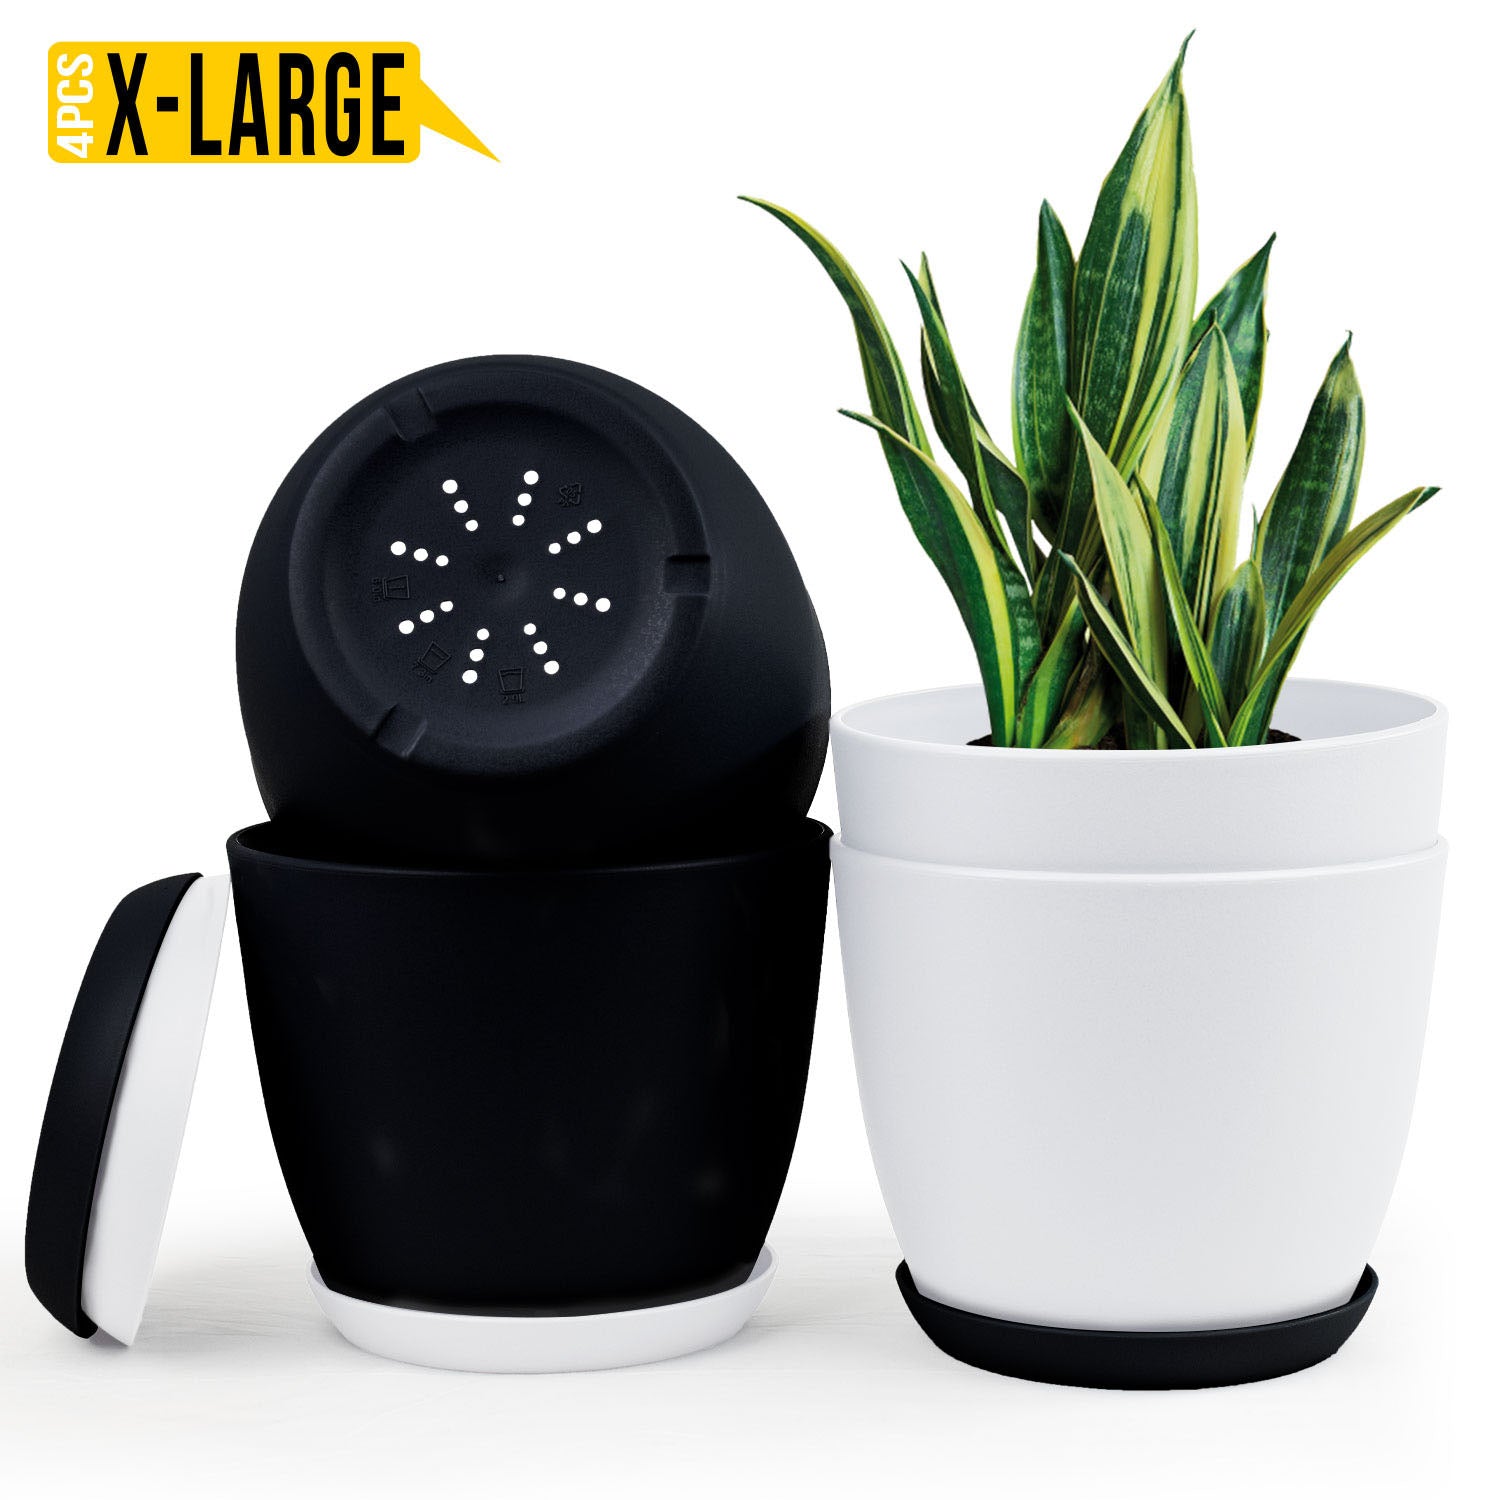 Fast Forward Extra Large Plant Pots with Drainage: Stylish Home Decor Flower Pots in Two Vibrant Colors - Ideal for Indoor Planters, Multi-Packs for Plastic Planters, Cactus, and Succulents Fast Forward